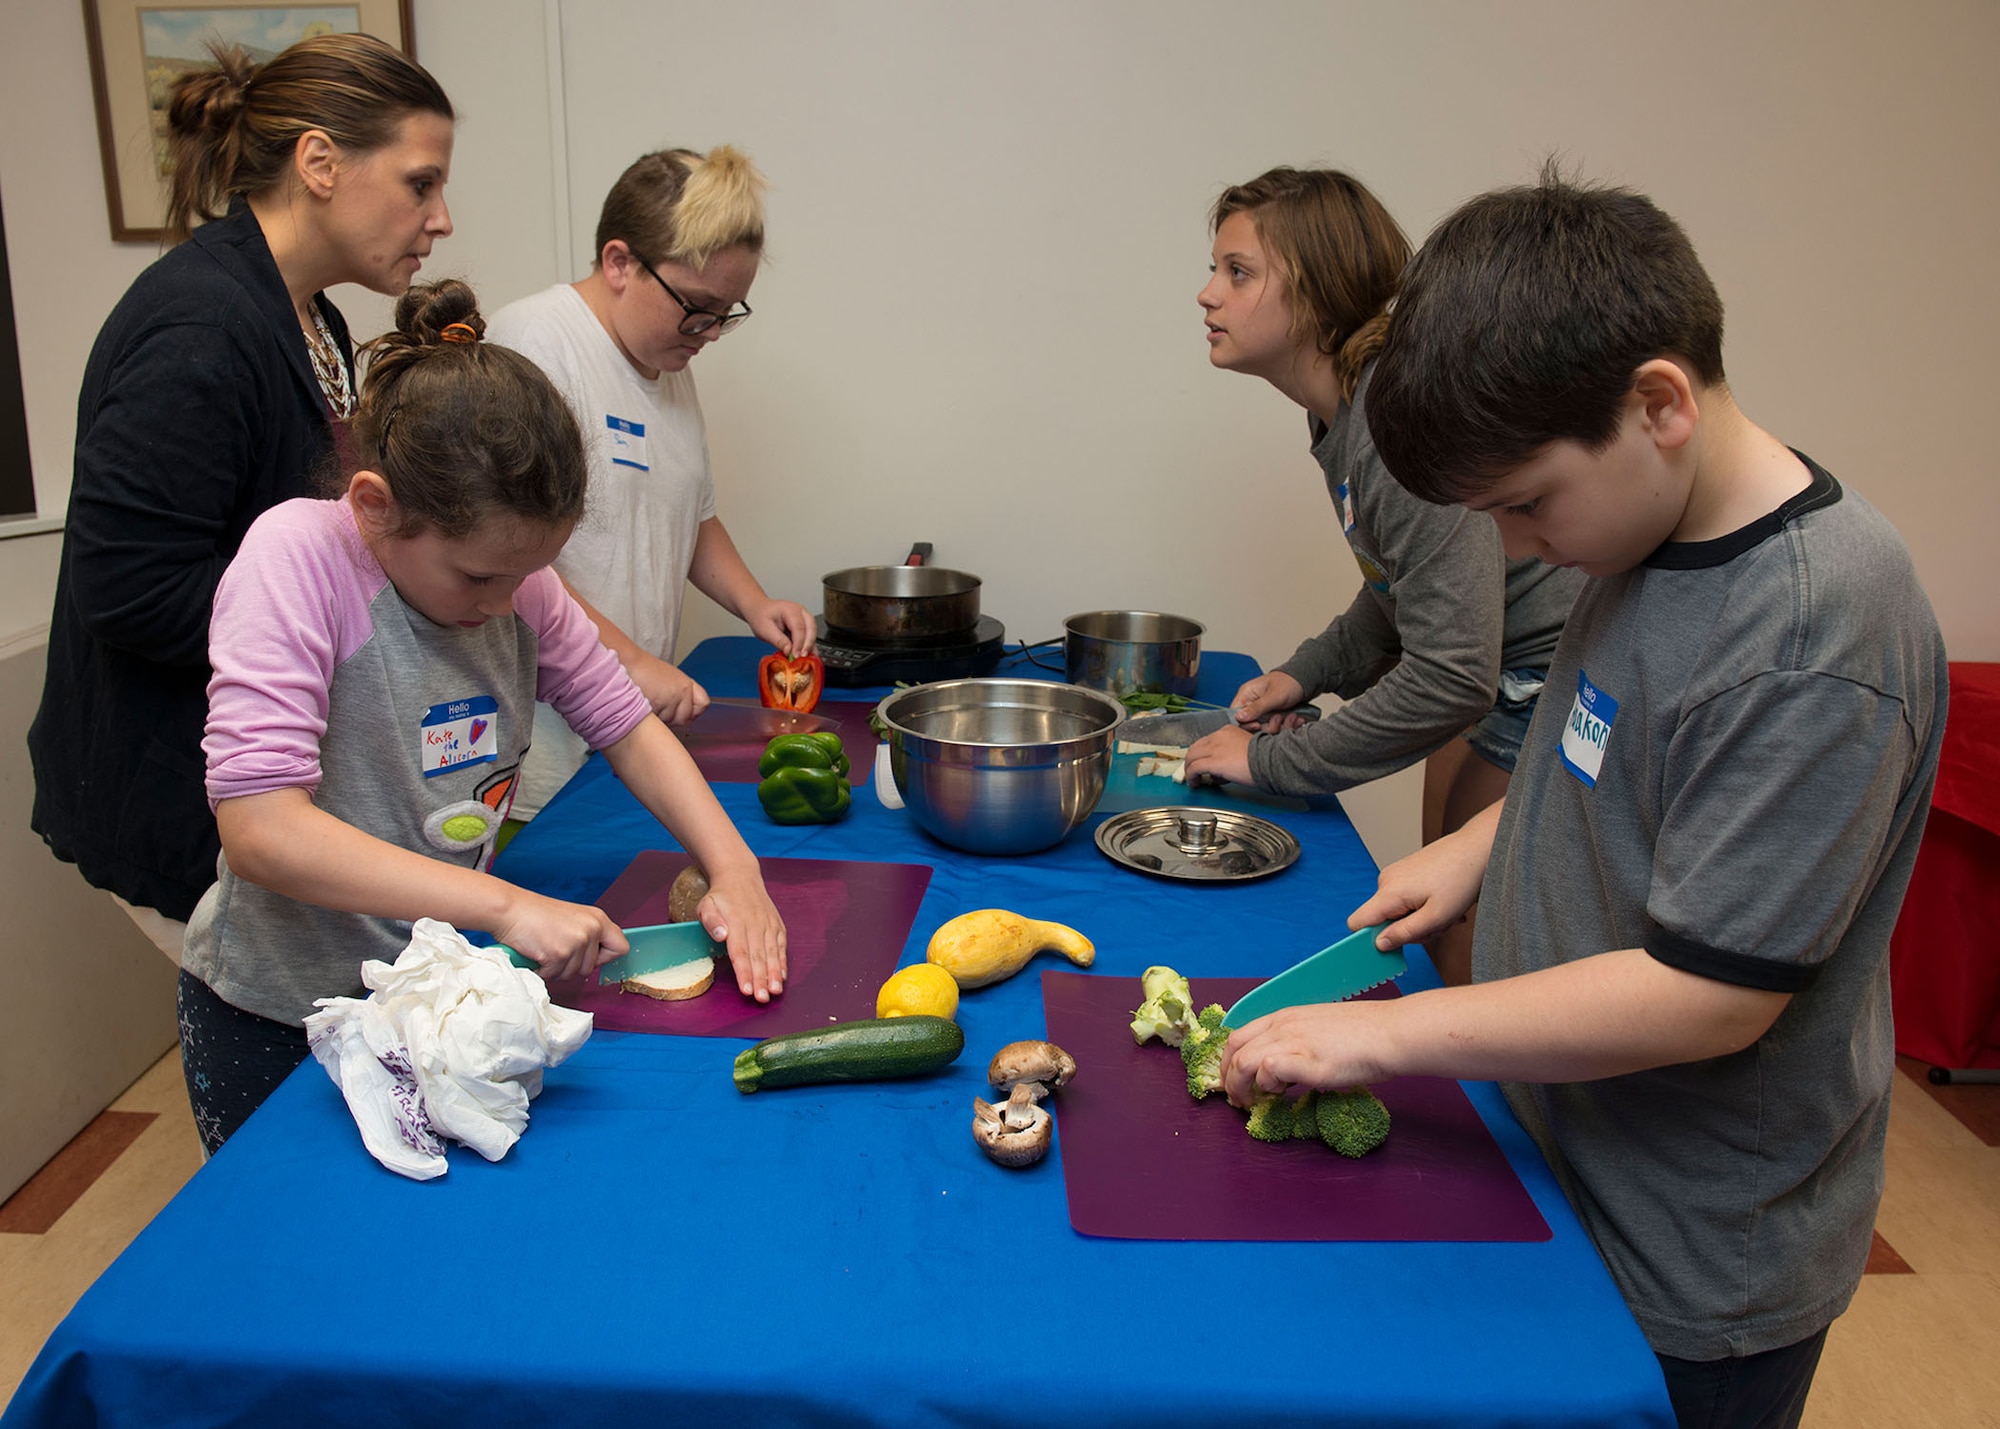 Pictured (far left) Newton guides a team of Jr. Chefs as they prepare food during the Jr. Chef Boot Camp cooking competition. According to founder Alicia Newton, the program is designed to teach the importance of leadership and facilitate healthy relationships.